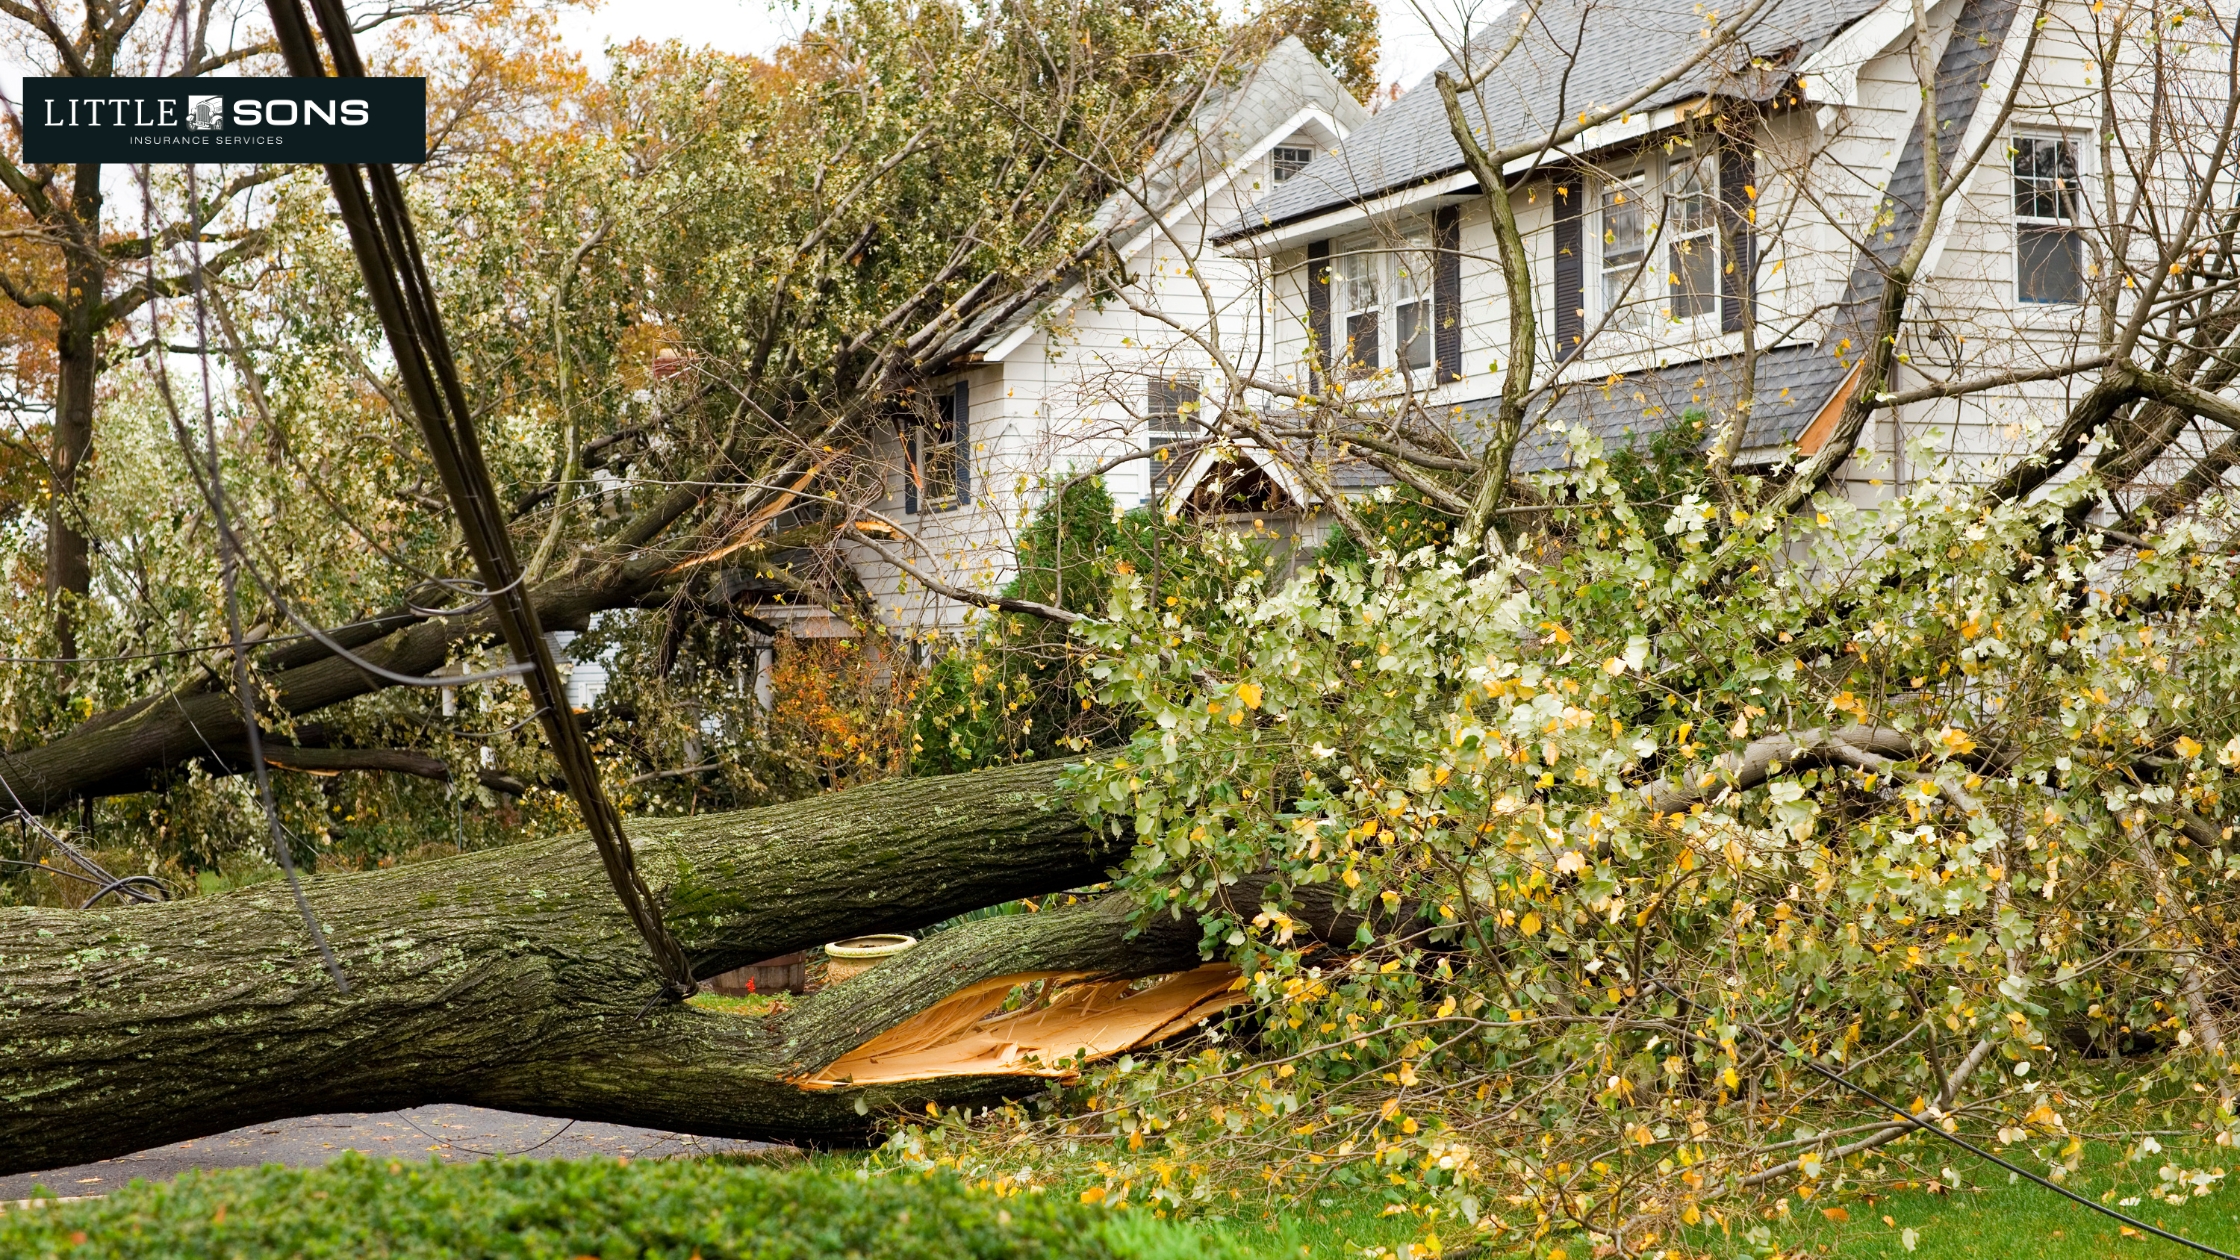 10 Kinds of Damage Home Insurance Won’t Cover: Are You Prepared?